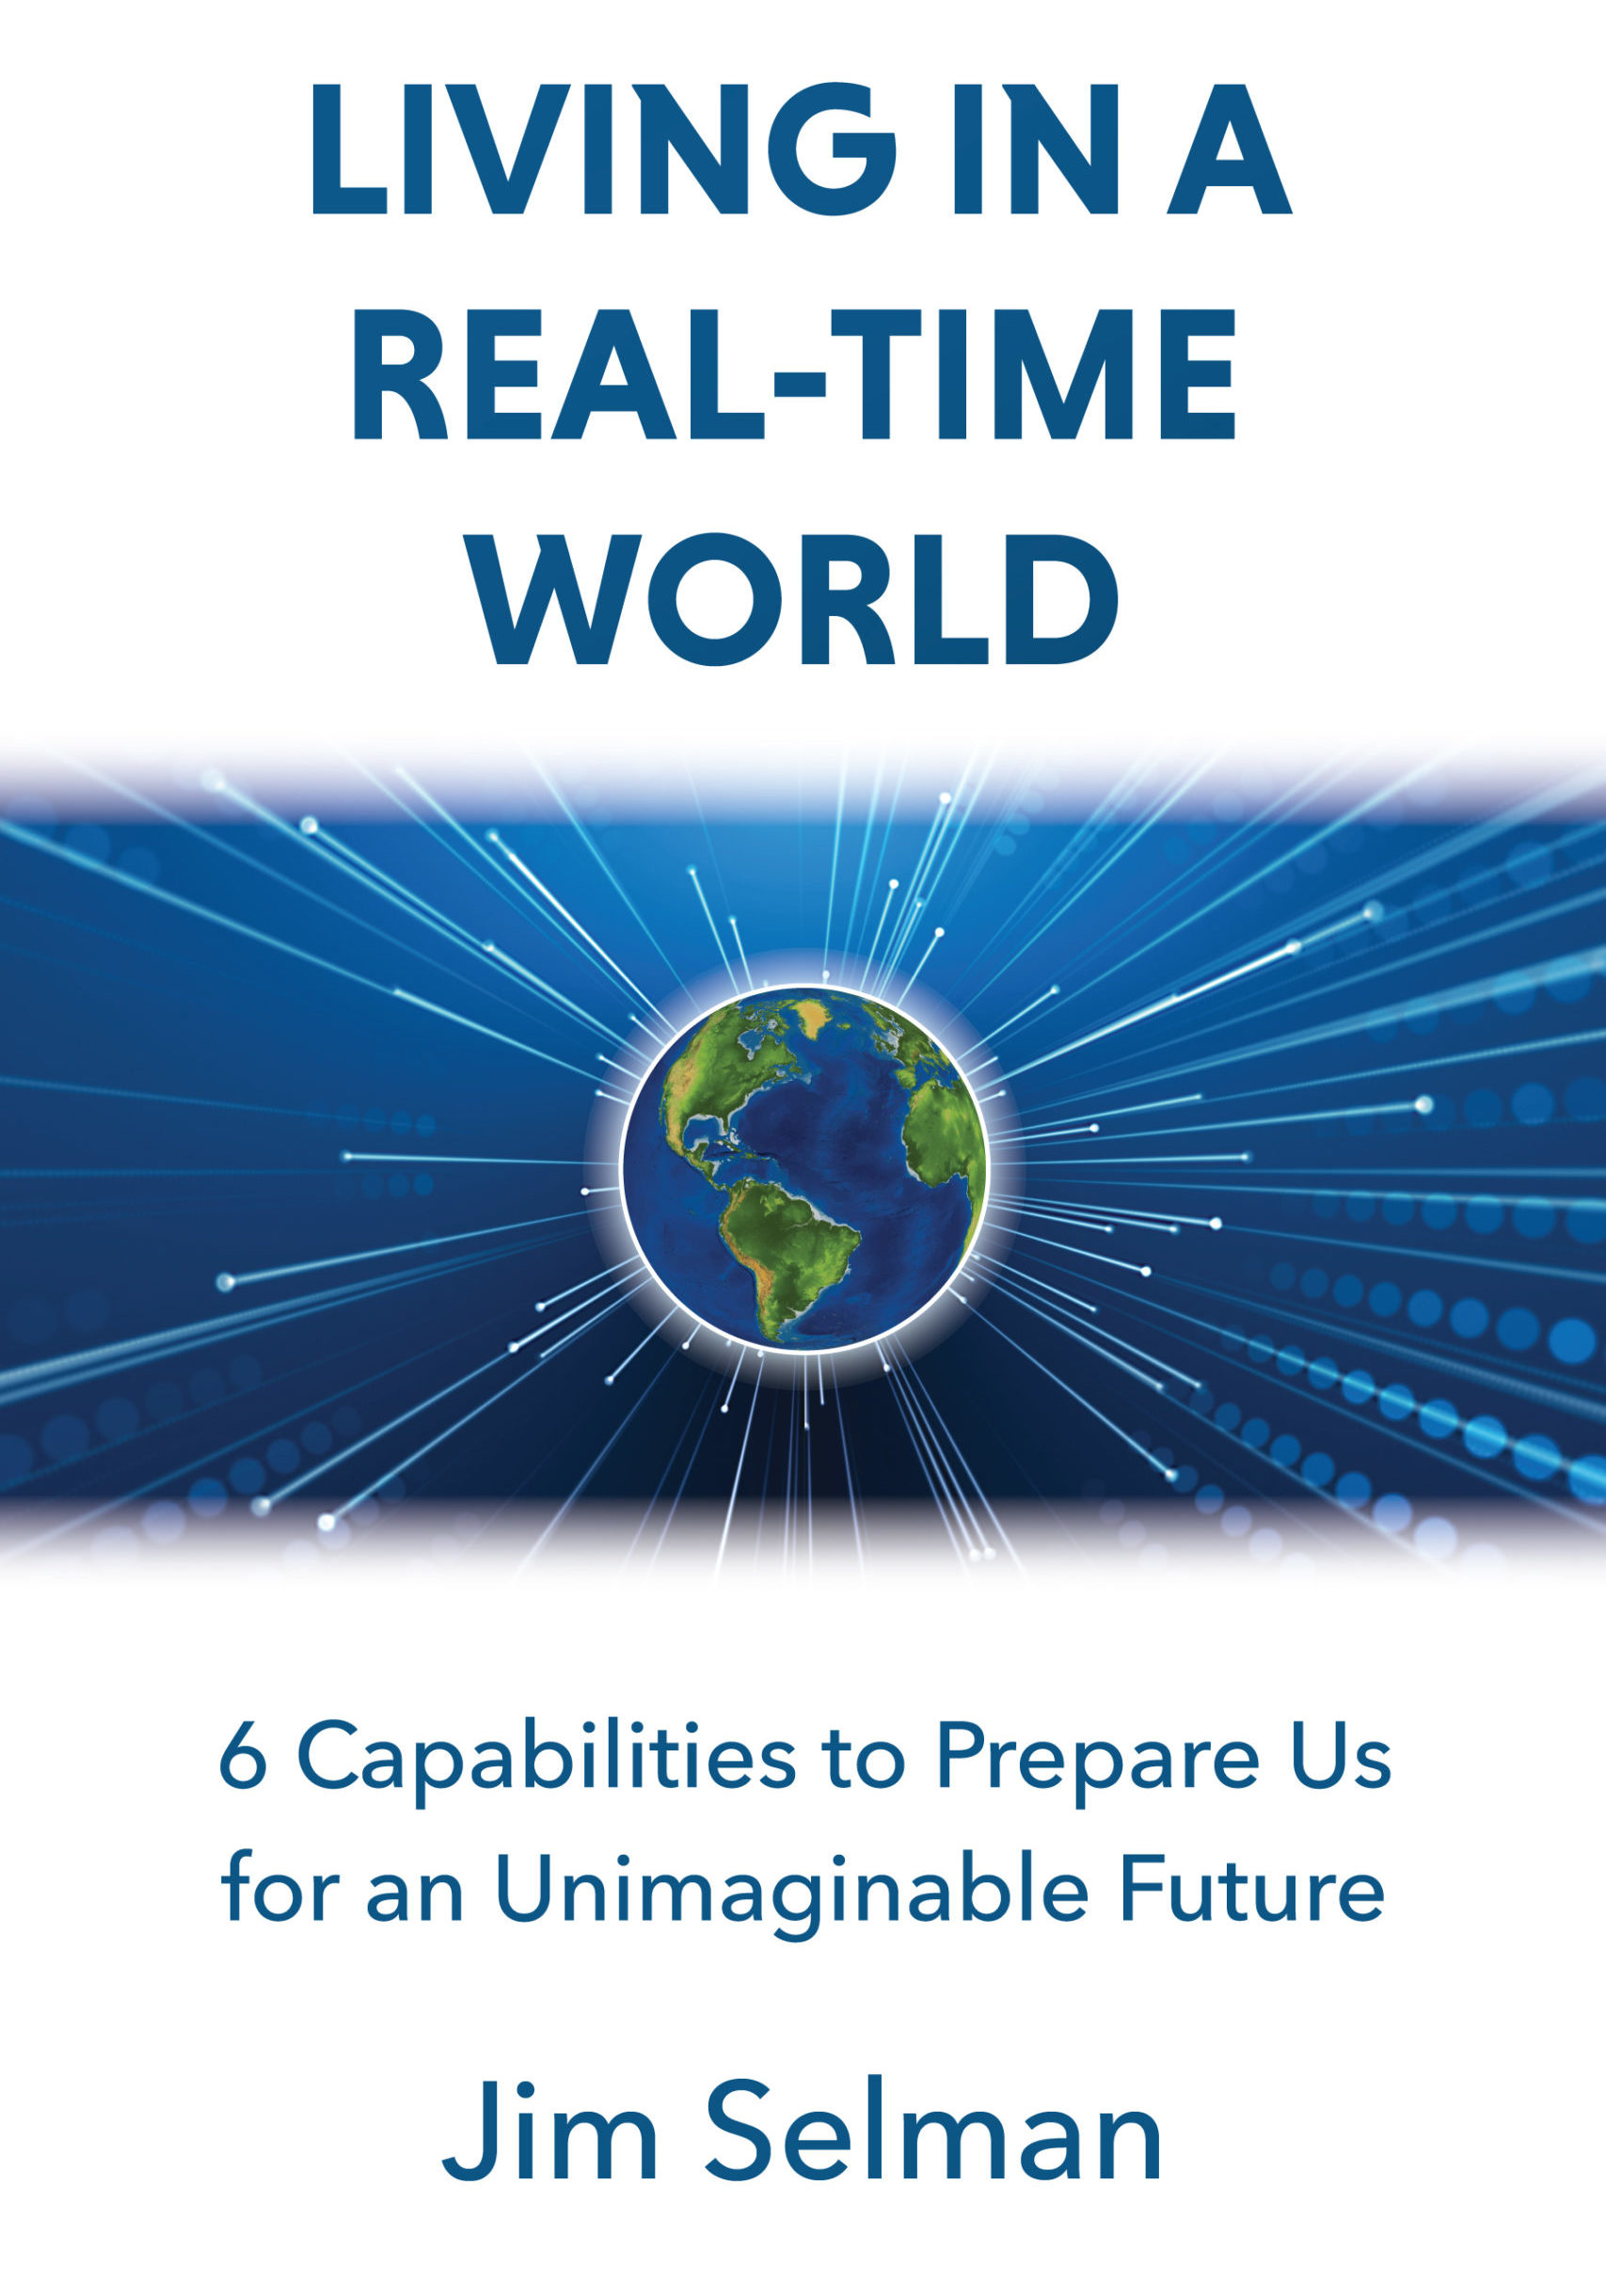 Living in a Real-Time World: 6 Capabilities to Prepare us for an Unimaginable Future by Jim Selman